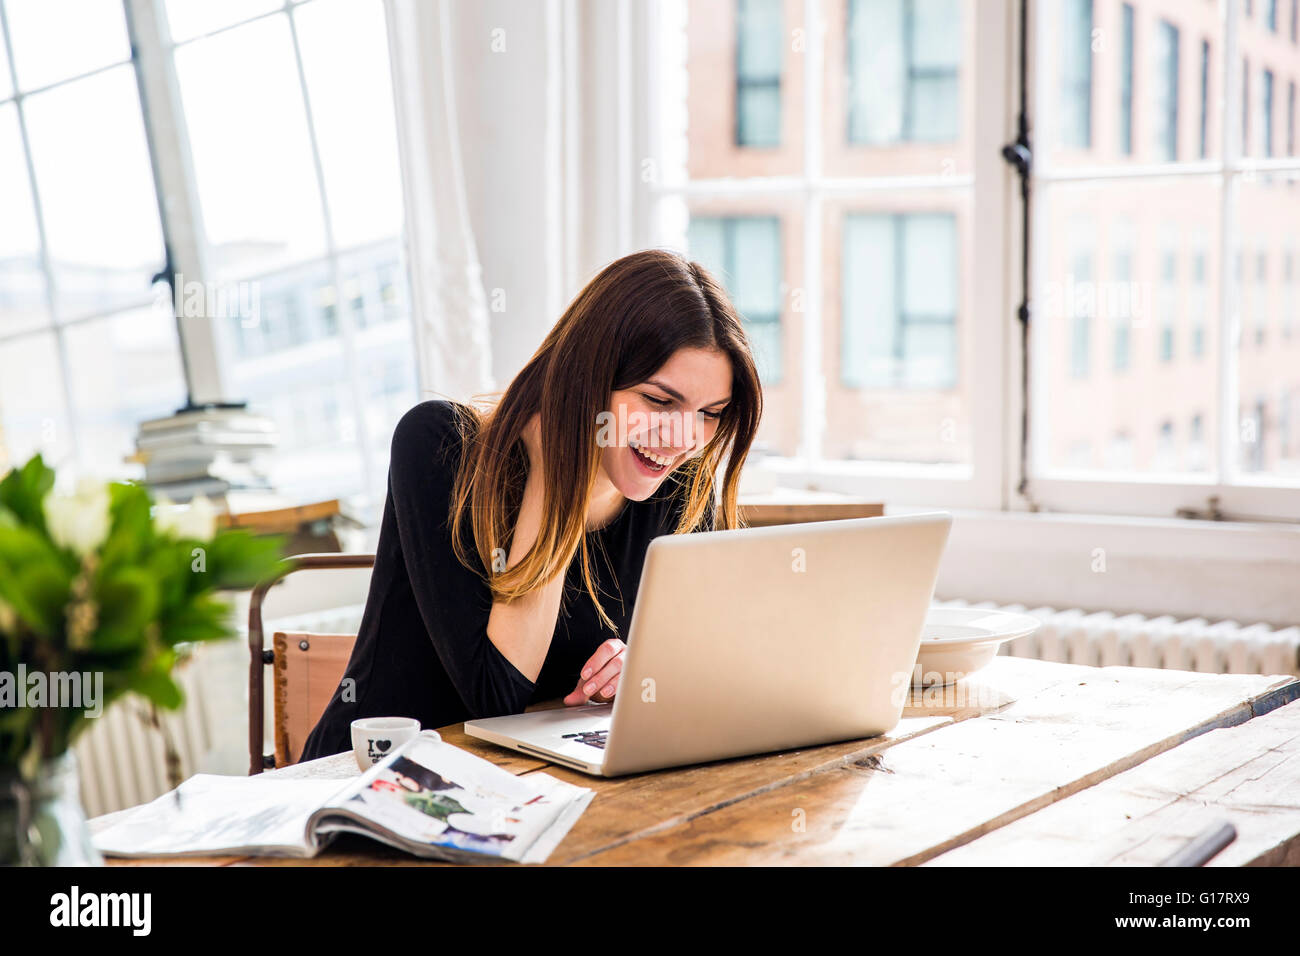 Young woman in city apartment laughing whilst working on laptop Stock Photo